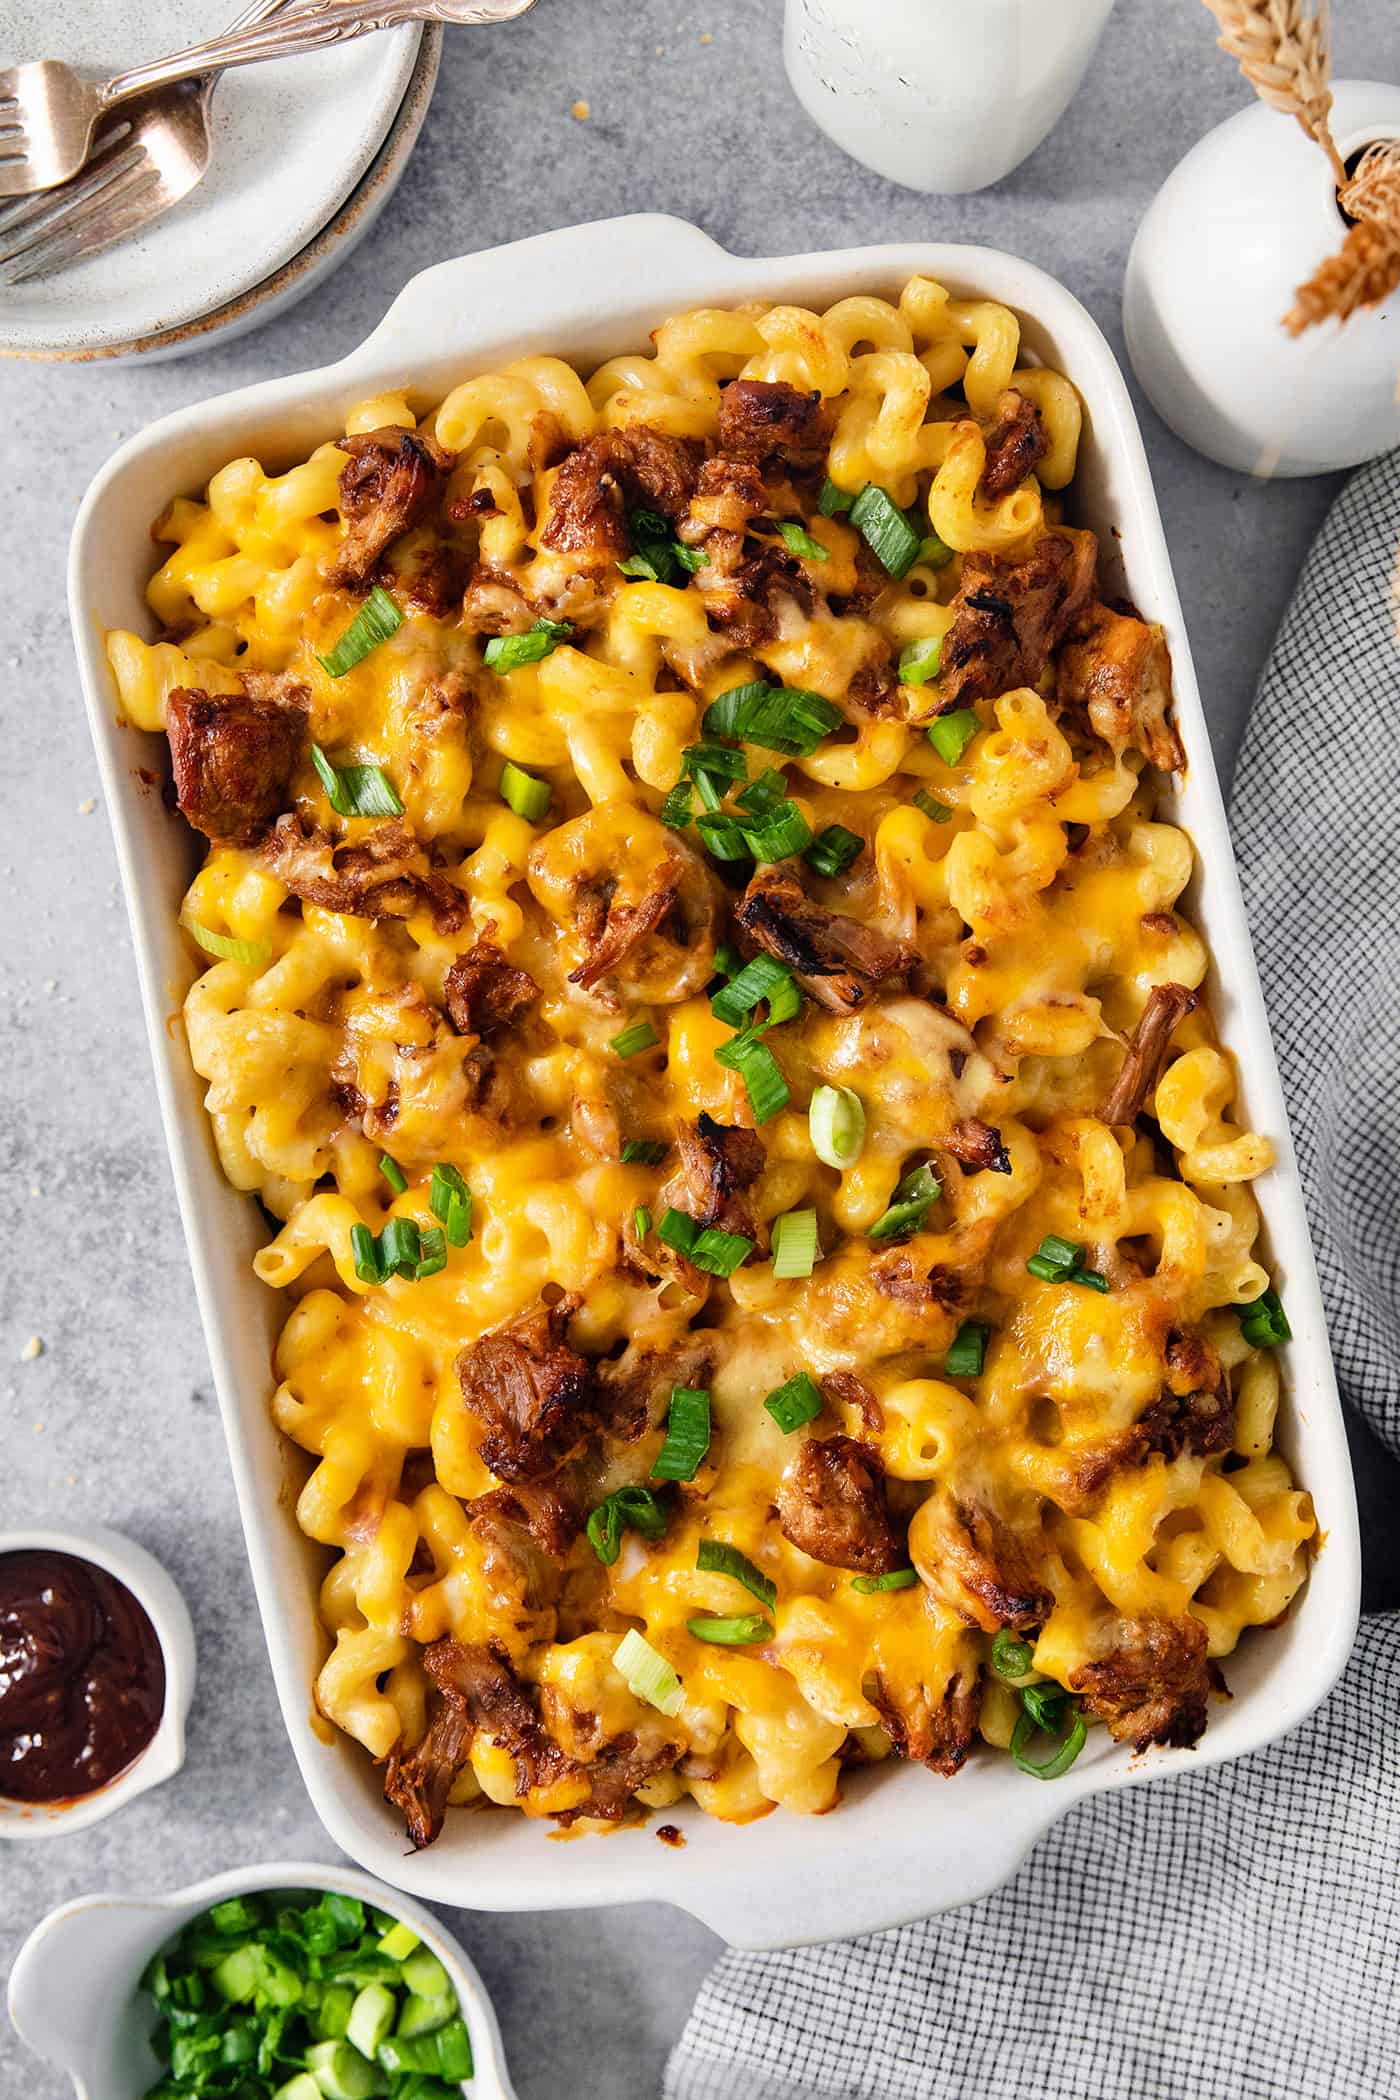 A cheesy casserole dish full of pulled pork mac and cheese on a table with a dish of chopped green onions nearby.